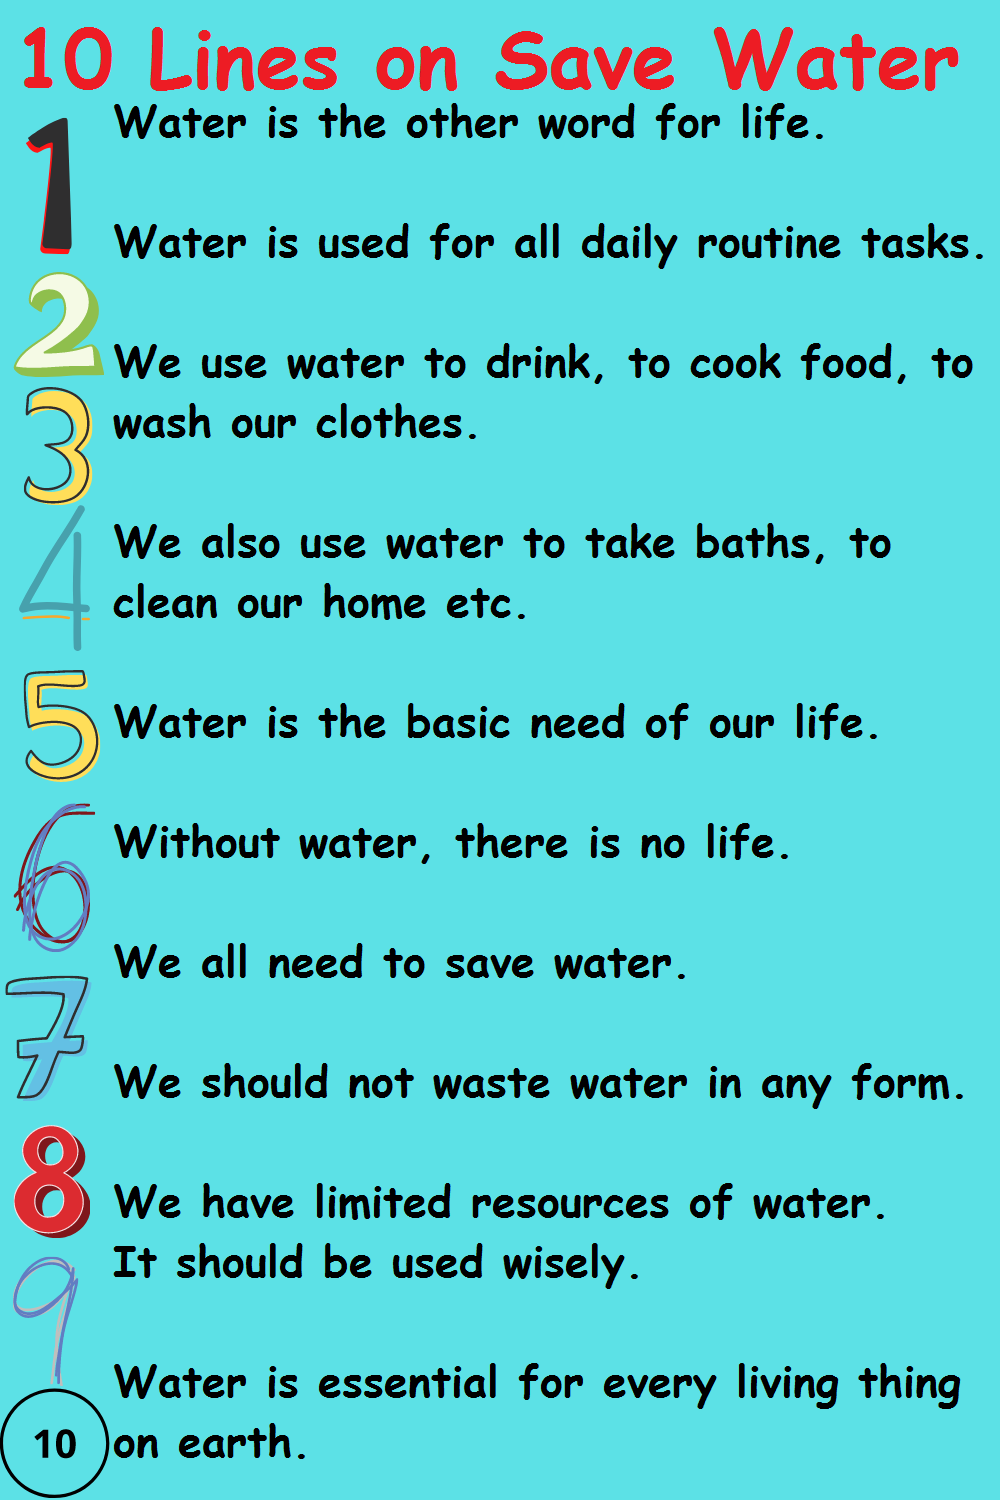 essay on save water 10 lines